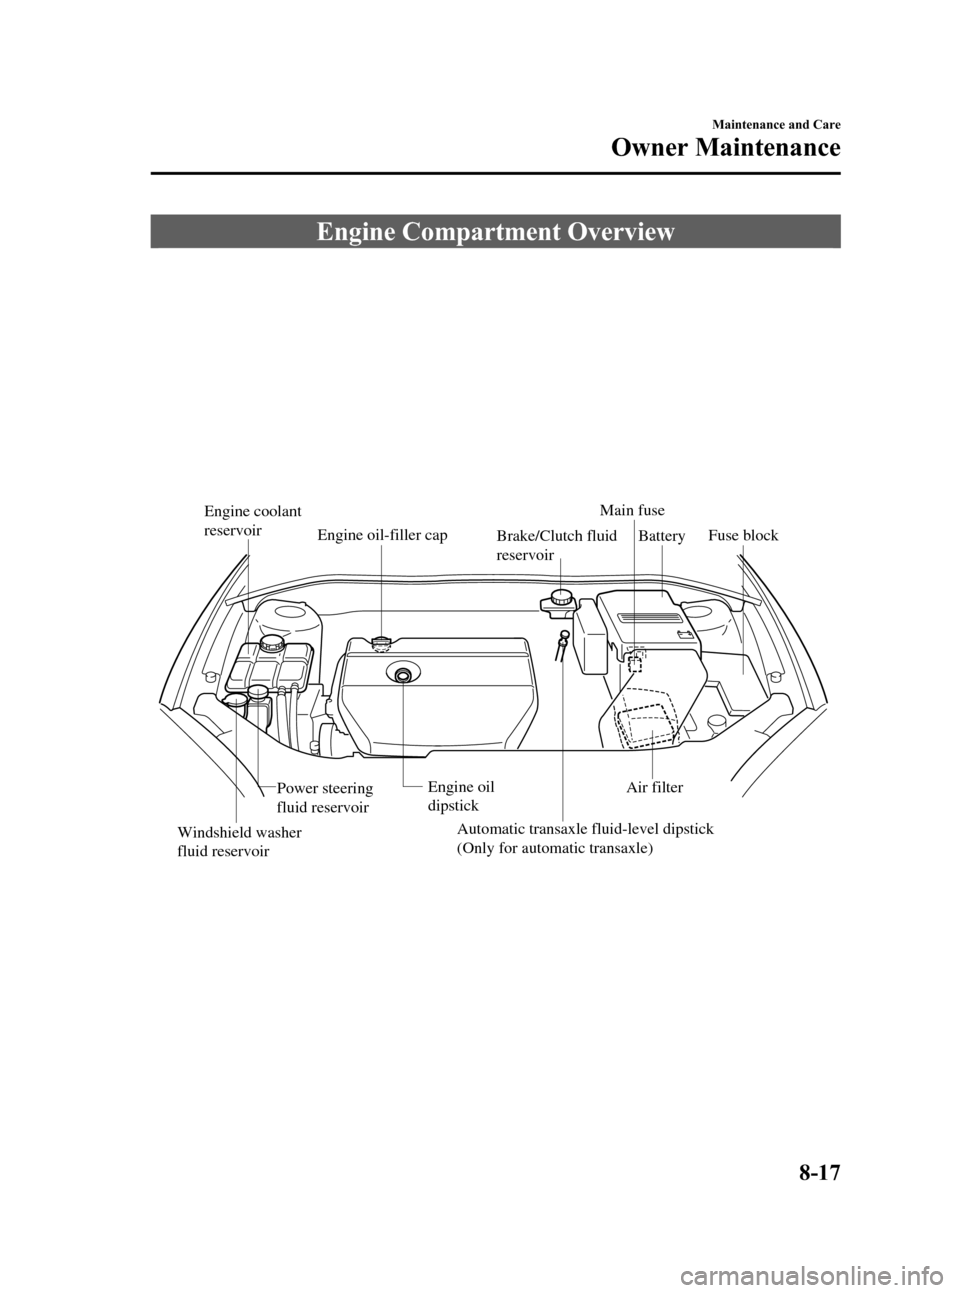 MAZDA MODEL 3 HATCHBACK 2006  Owners Manual (in English) Black plate (265,1)
Engine Compartment Overview
Fuse block
Air filterBattery Engine oil-filler capMain fuse
Automatic transaxle fluid-level dipstick 
(Only for automatic transaxle)Brake/Clutch fluid 
